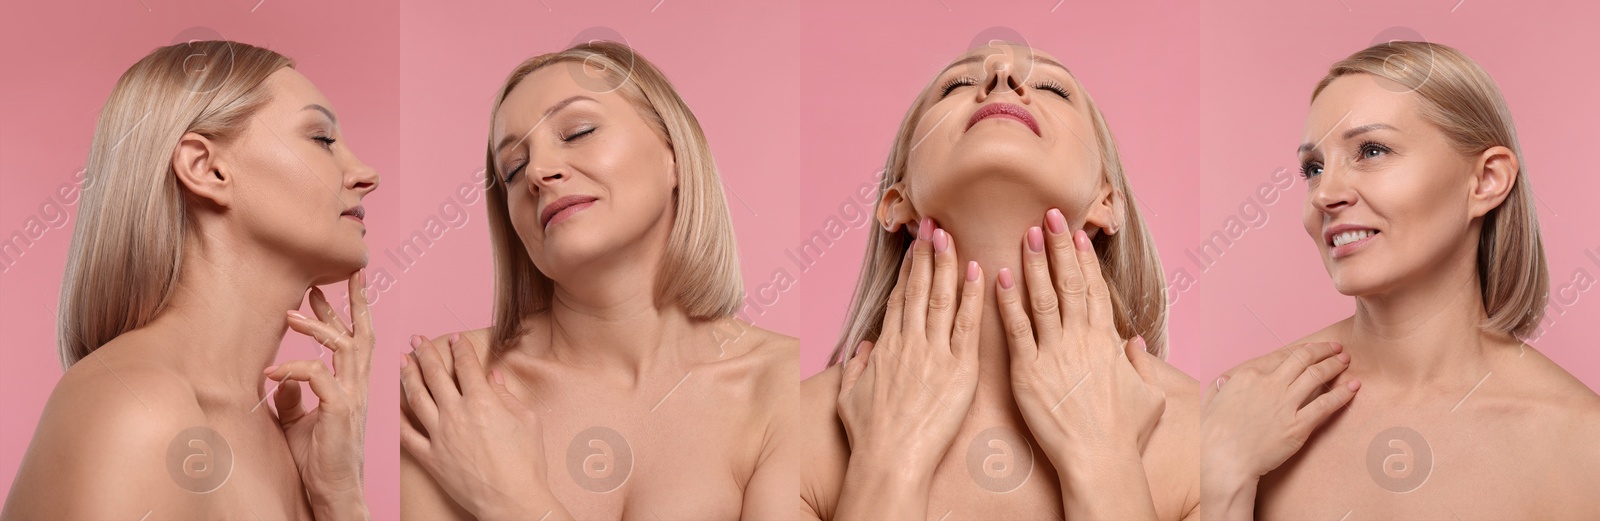 Image of Woman with healthy skin on pink background, set of photos